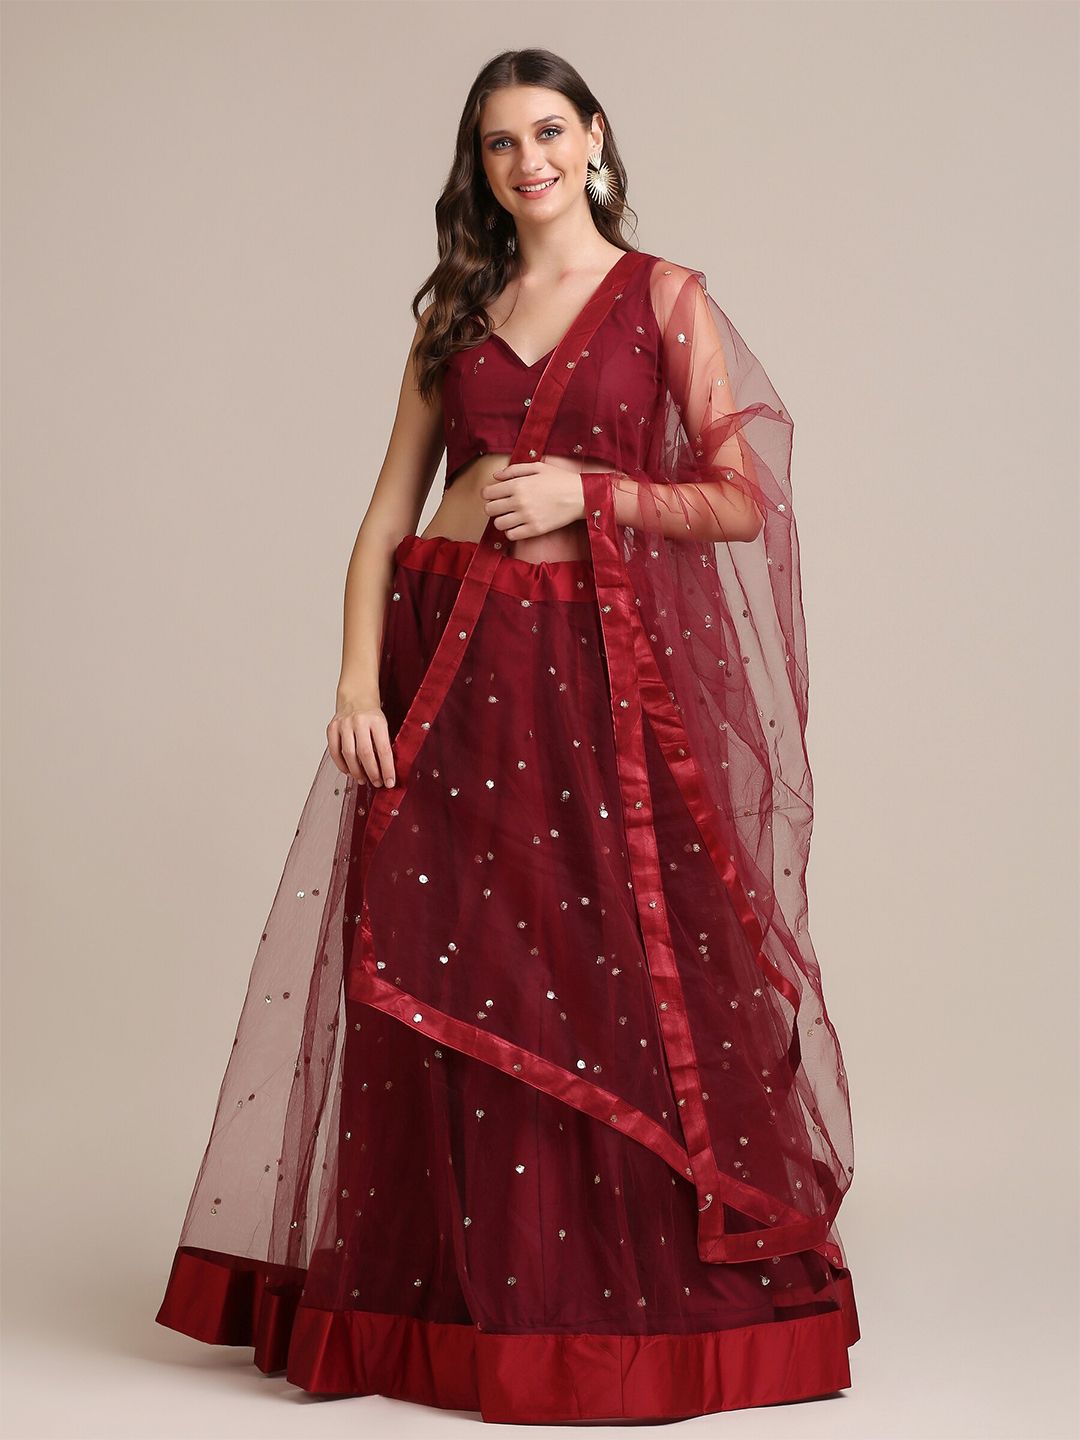 Warthy Ent Maroon & Silver-Toned Embellished Thread Work Semi-Stitched Lehenga Set Price in India